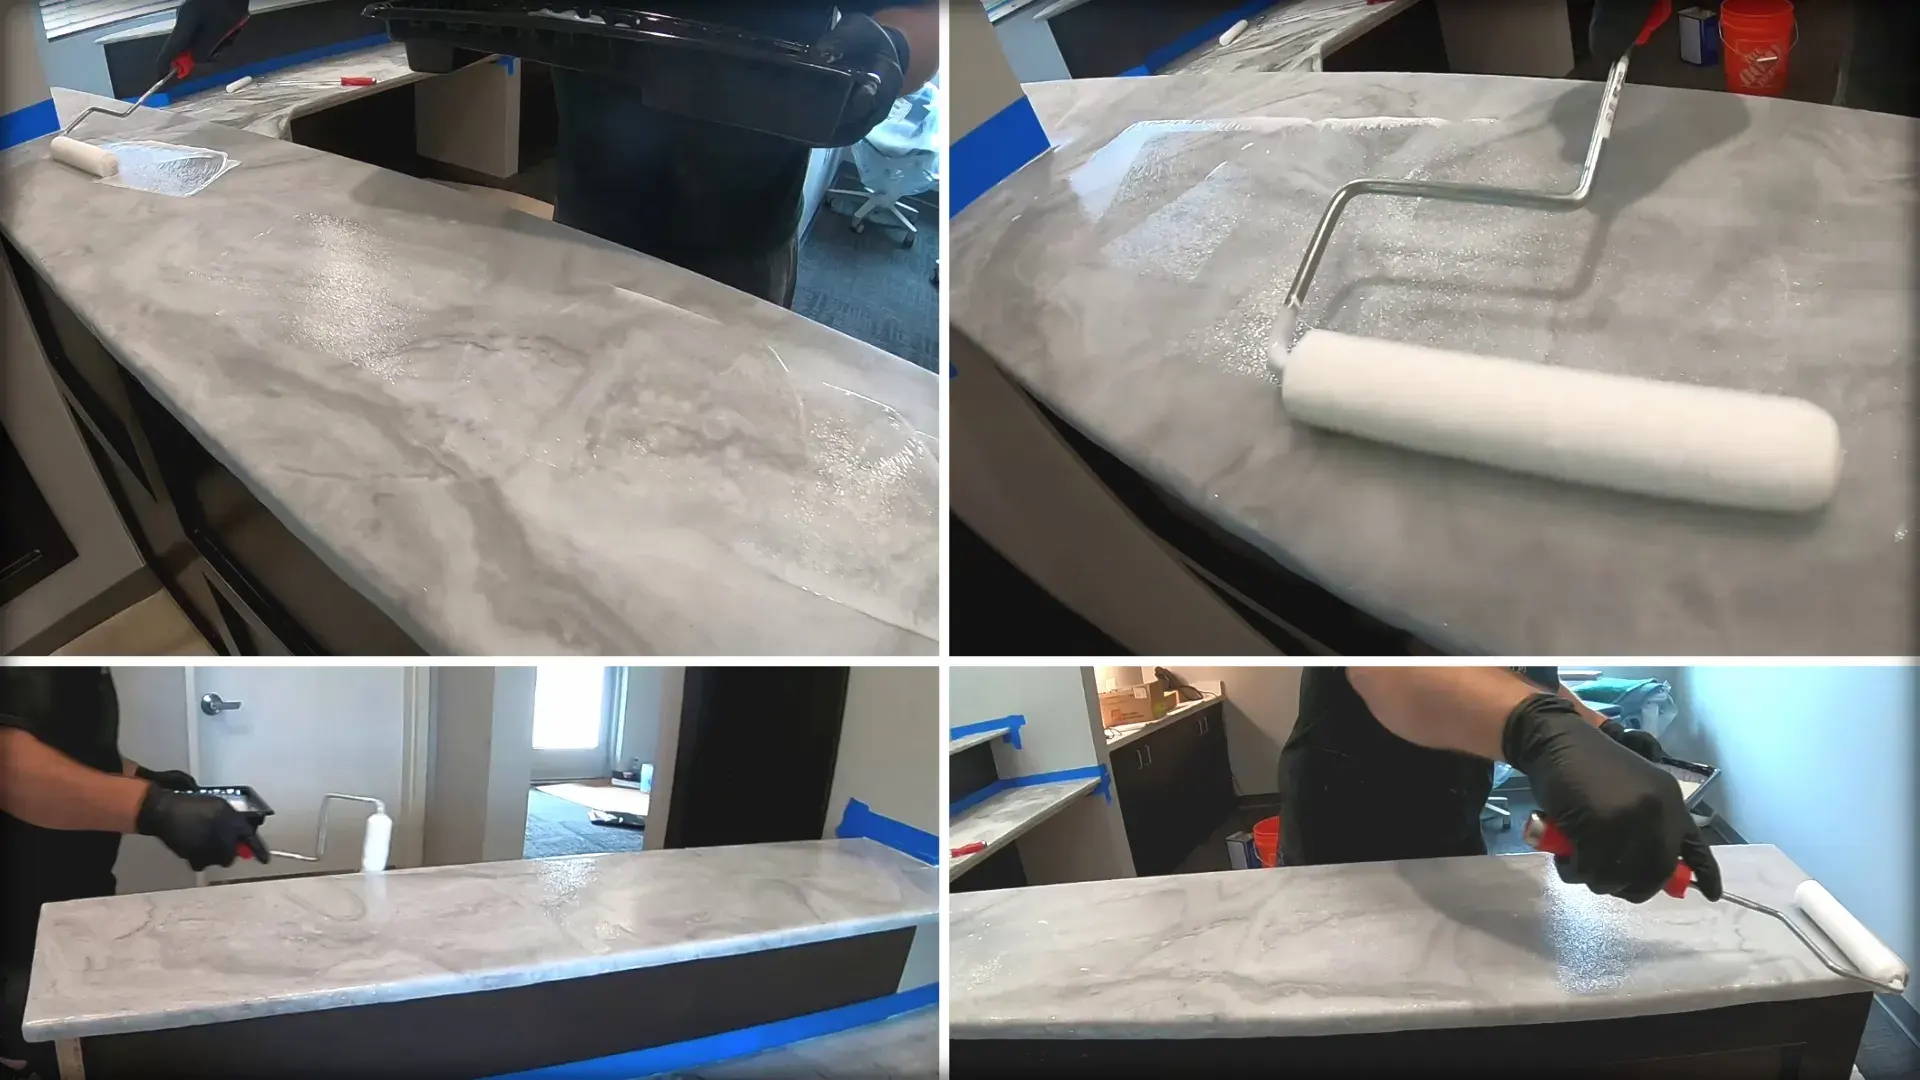 Apply to the center of the countertop, rolling the top coat thin and even, ensuring coverage of the edges.